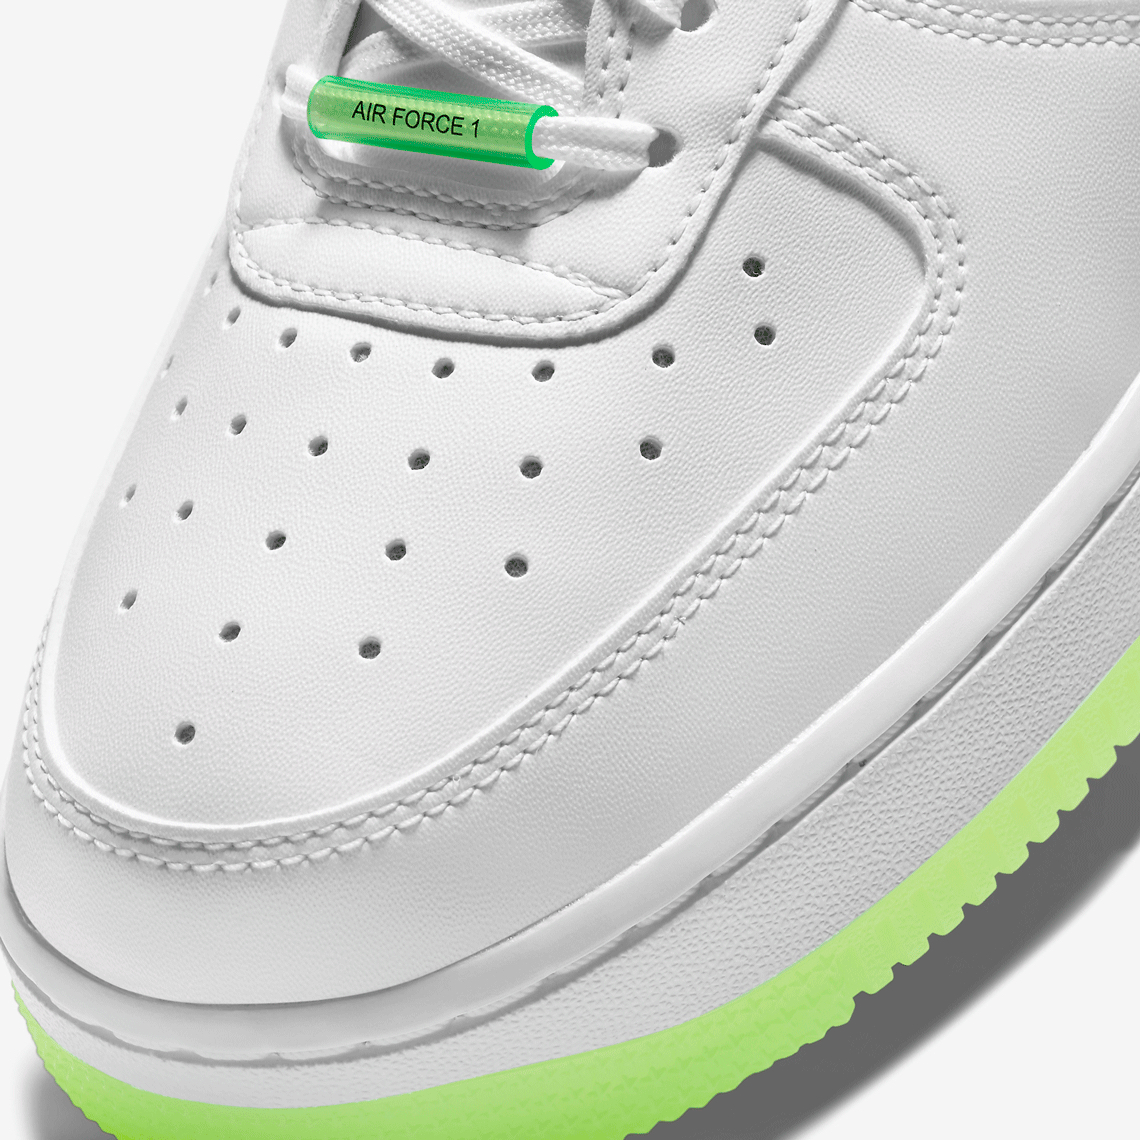 Nike Air Force 1 Have A Nike Day Release Date | SneakerNews.com